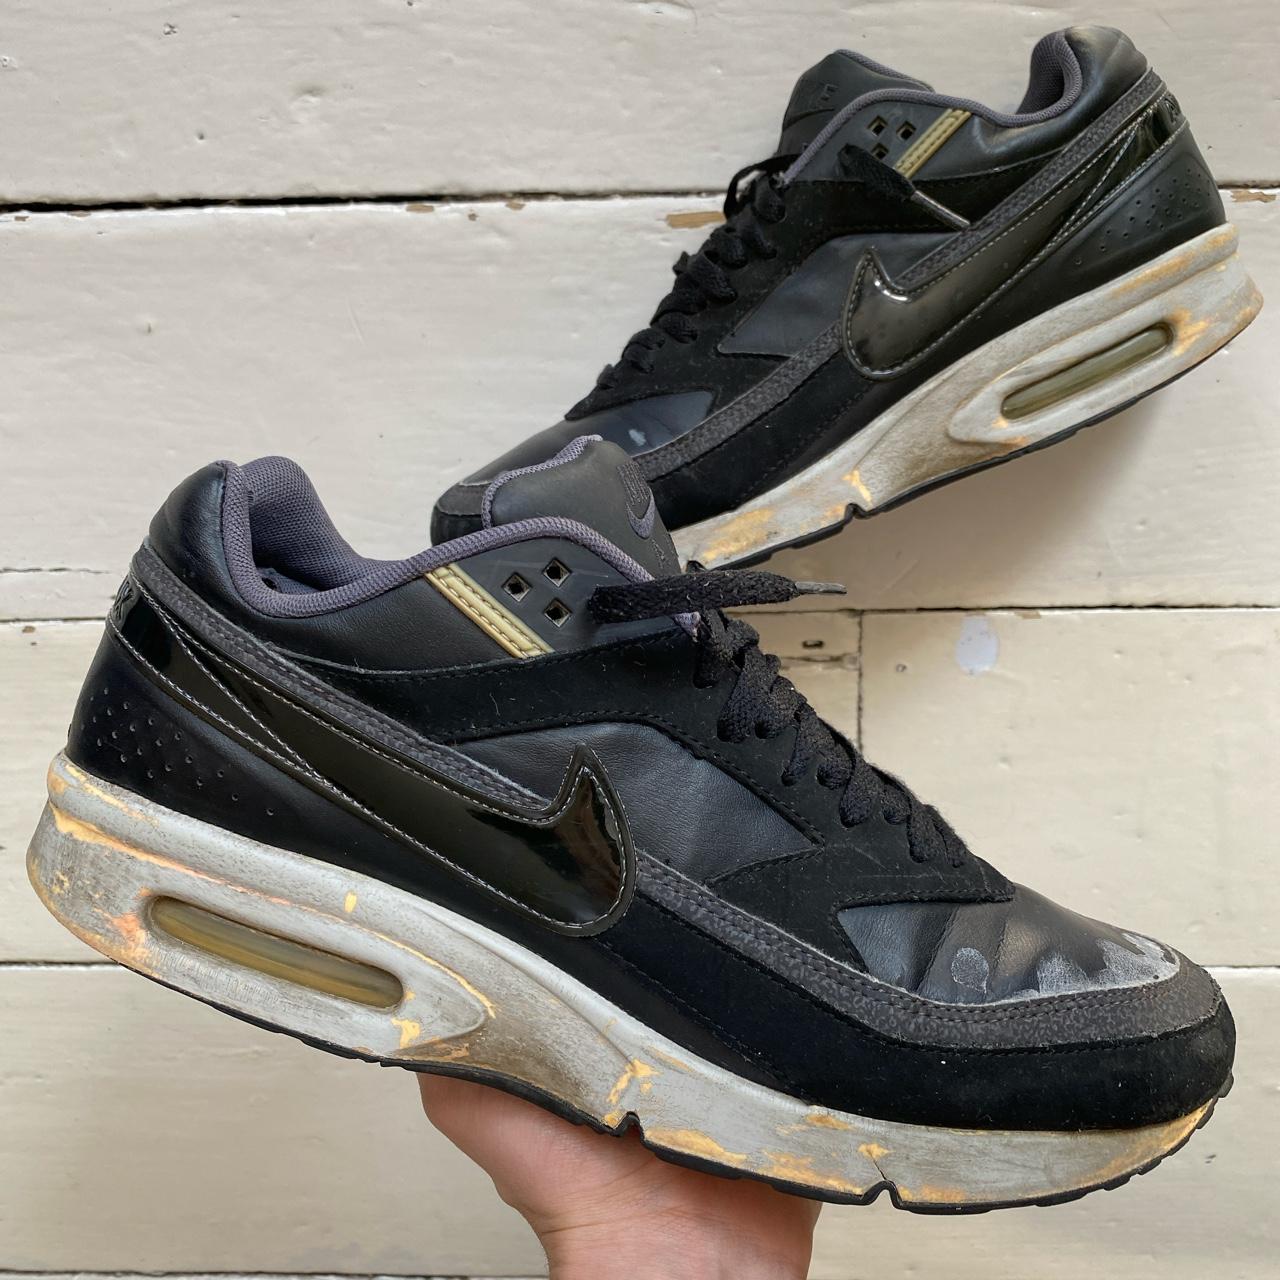 Nike Air Max BW Black 2012 💫 In good used condition,... - Depop